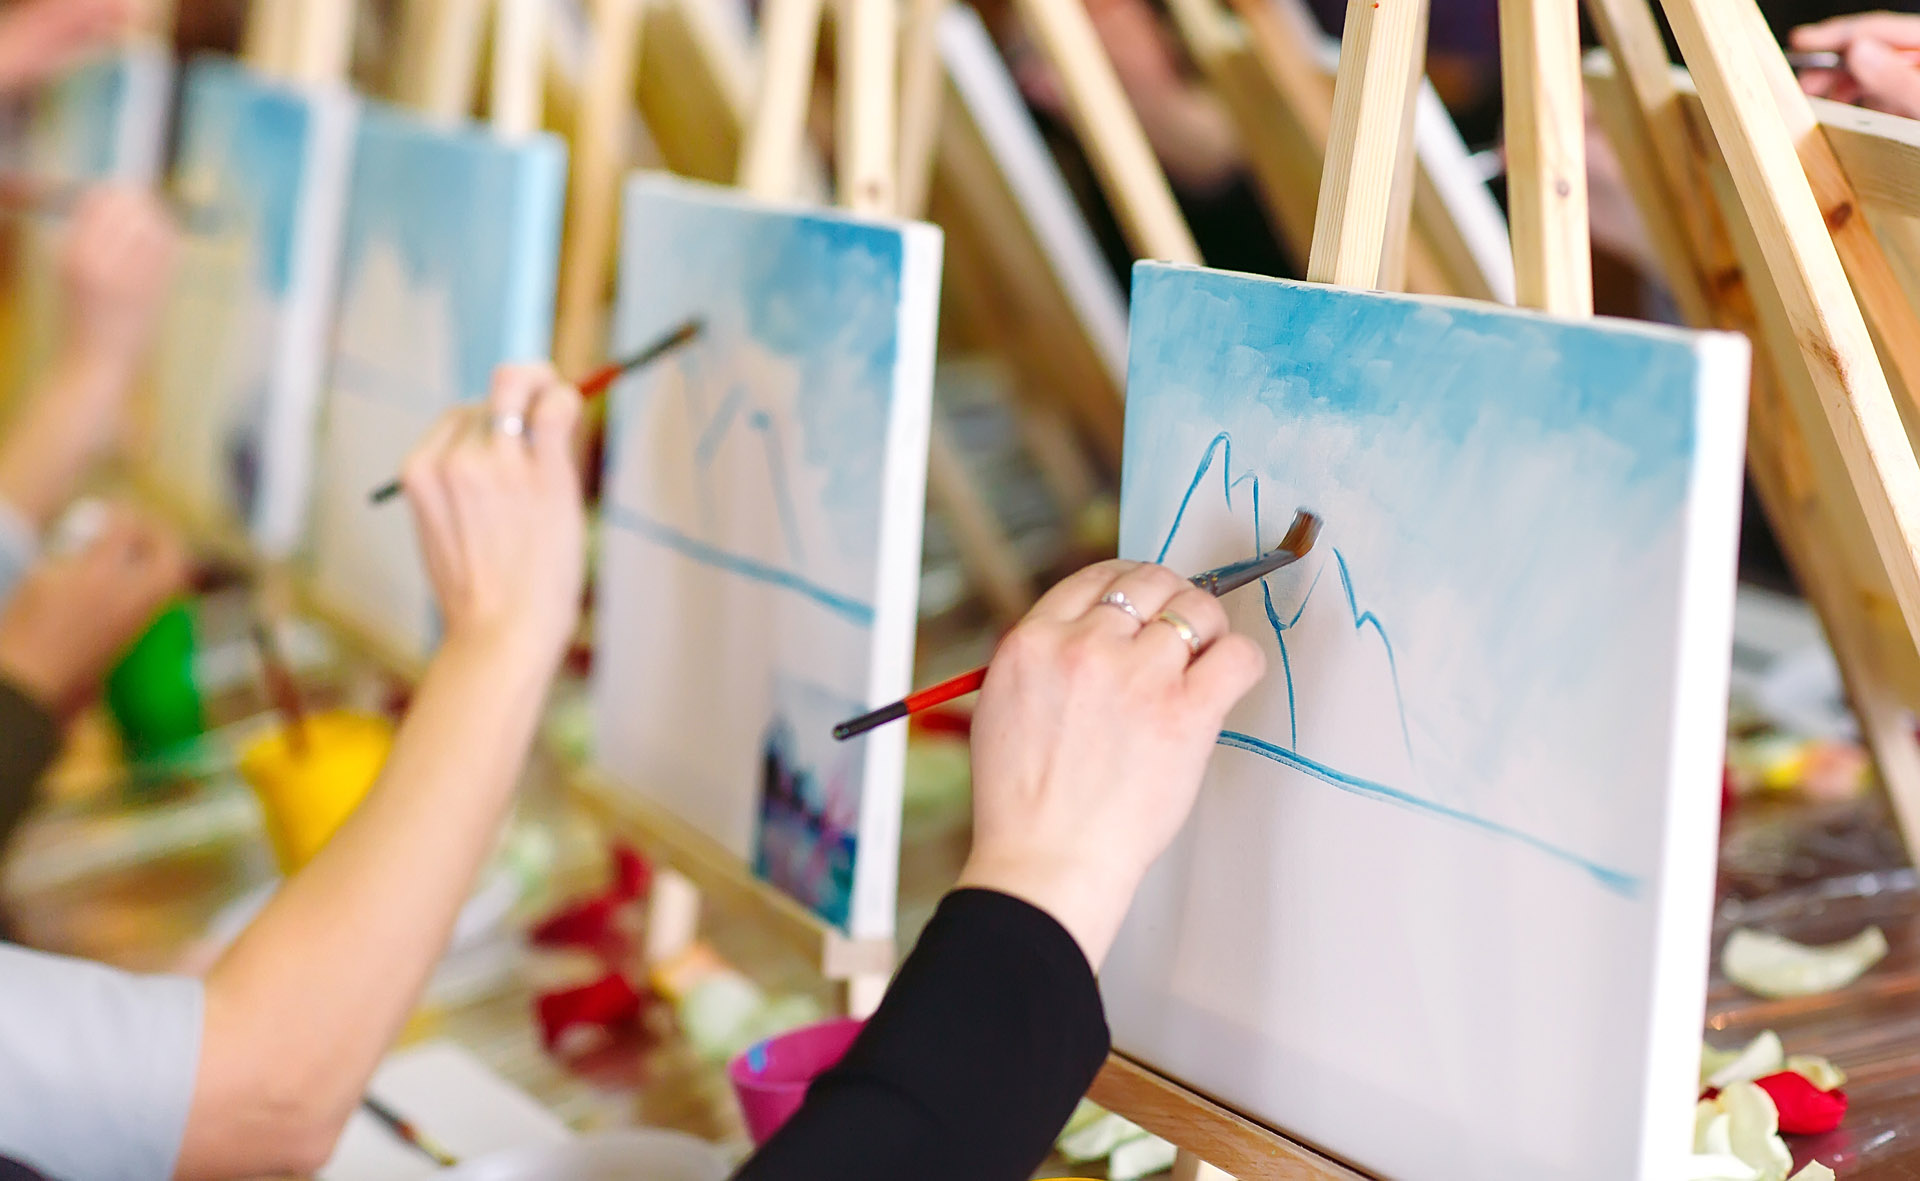 artists practicing brushstrokes on a row of easels